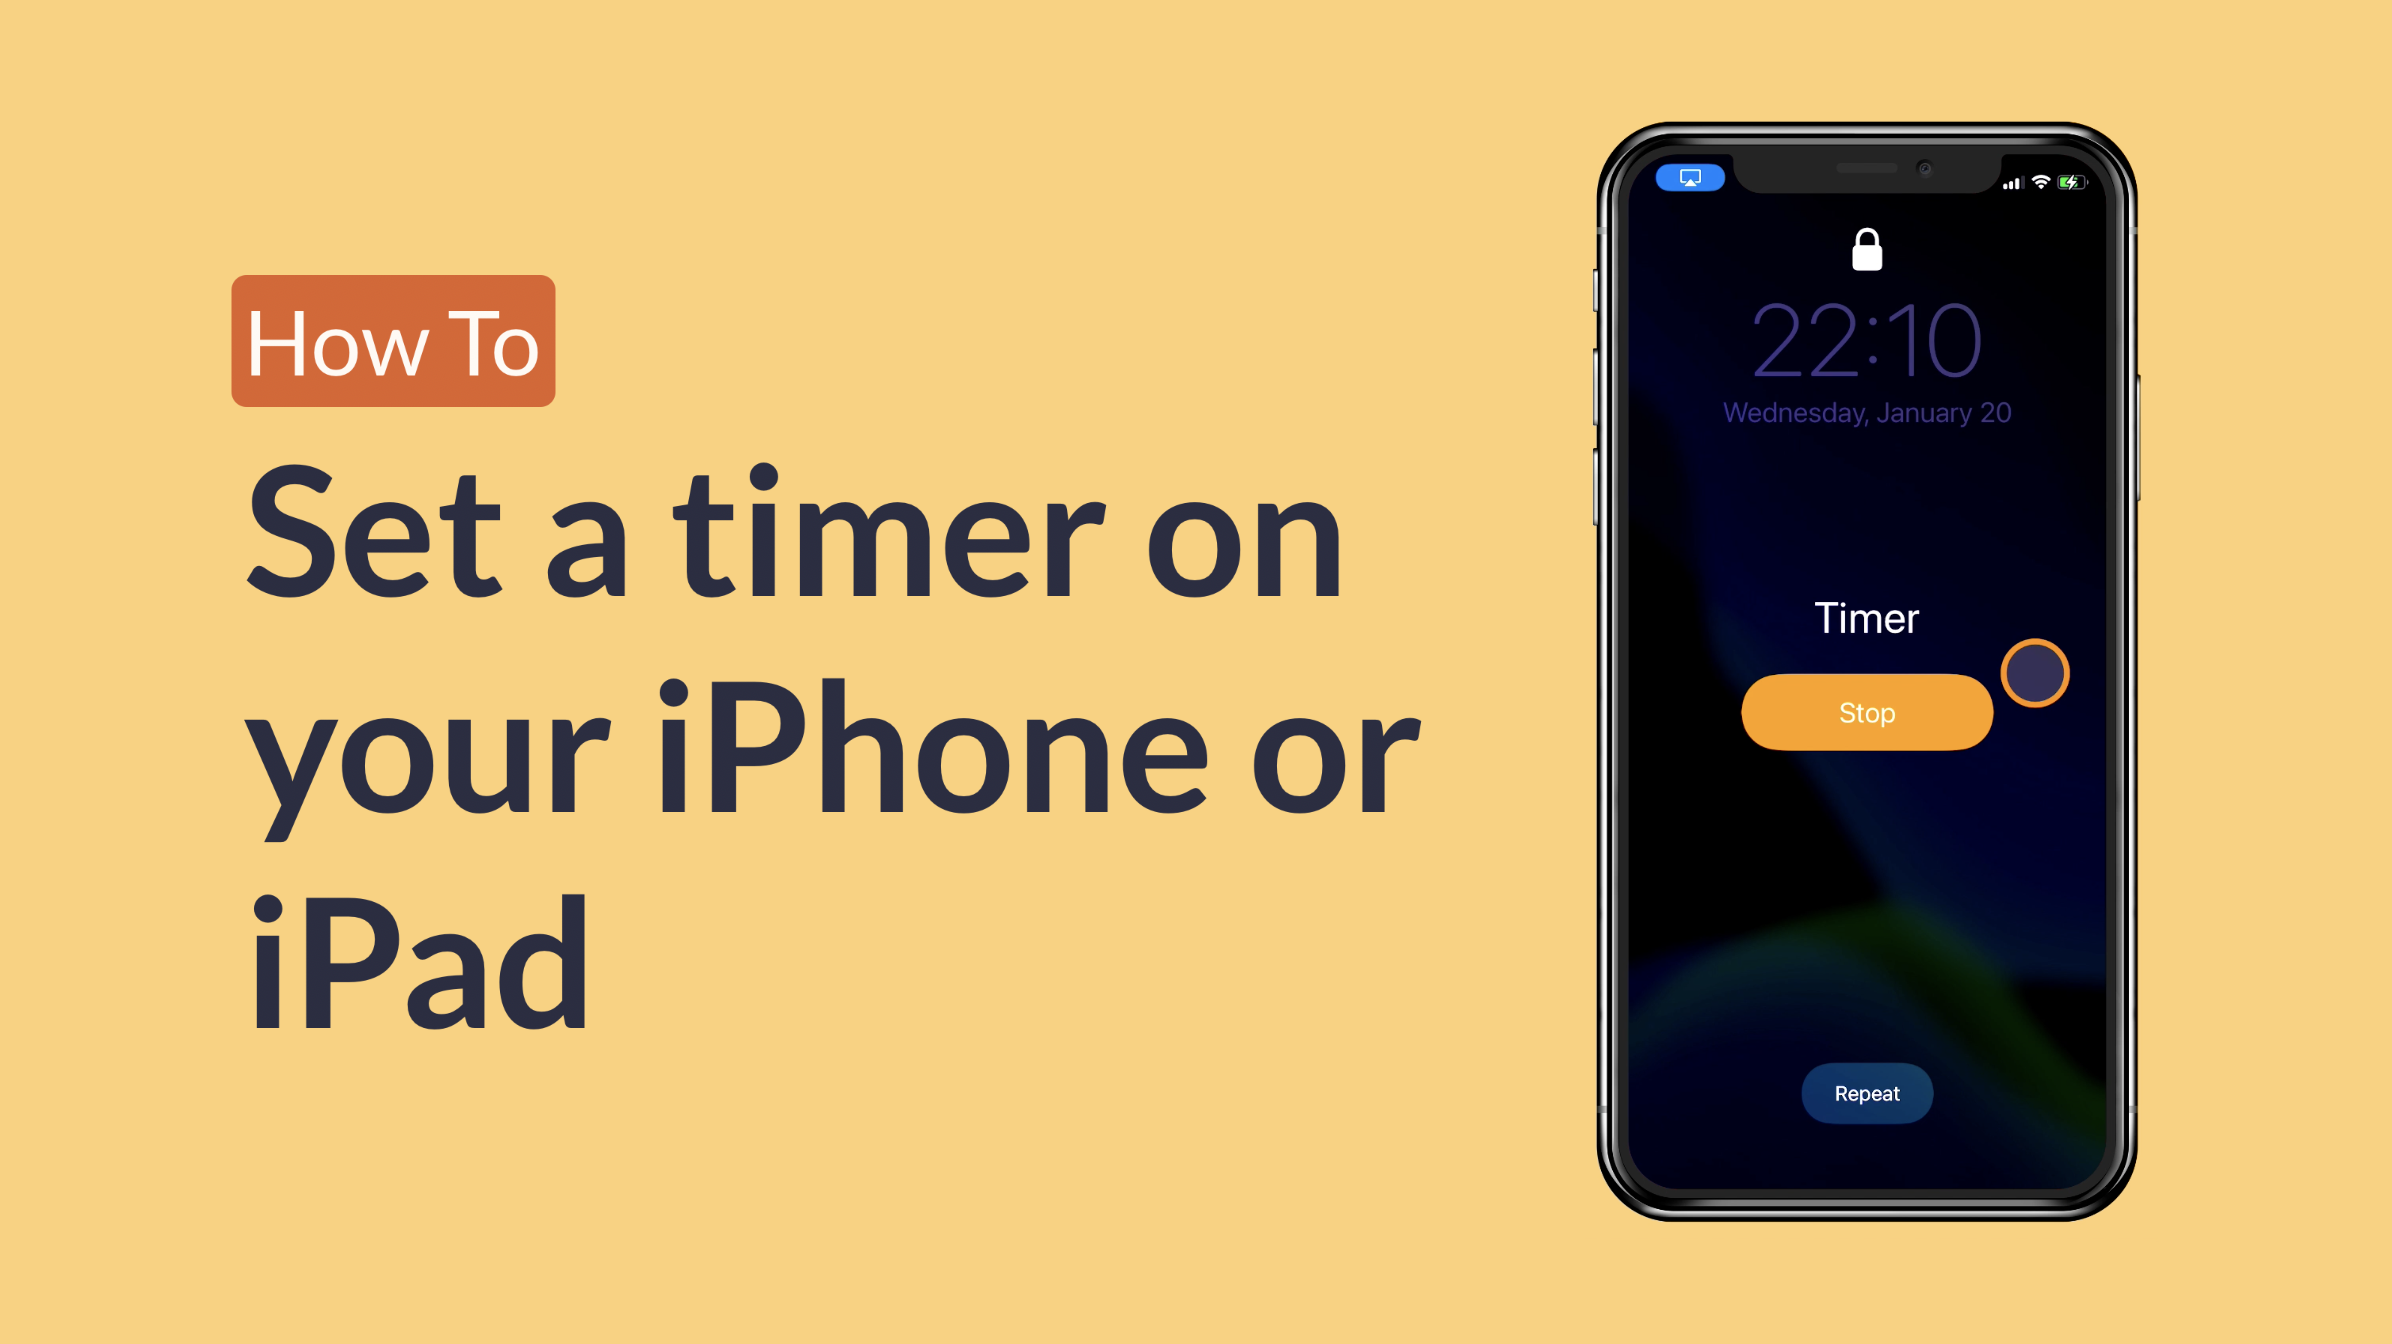 Discover how to set a timer on your iPhone or iPad and more on Tech Lifesavers